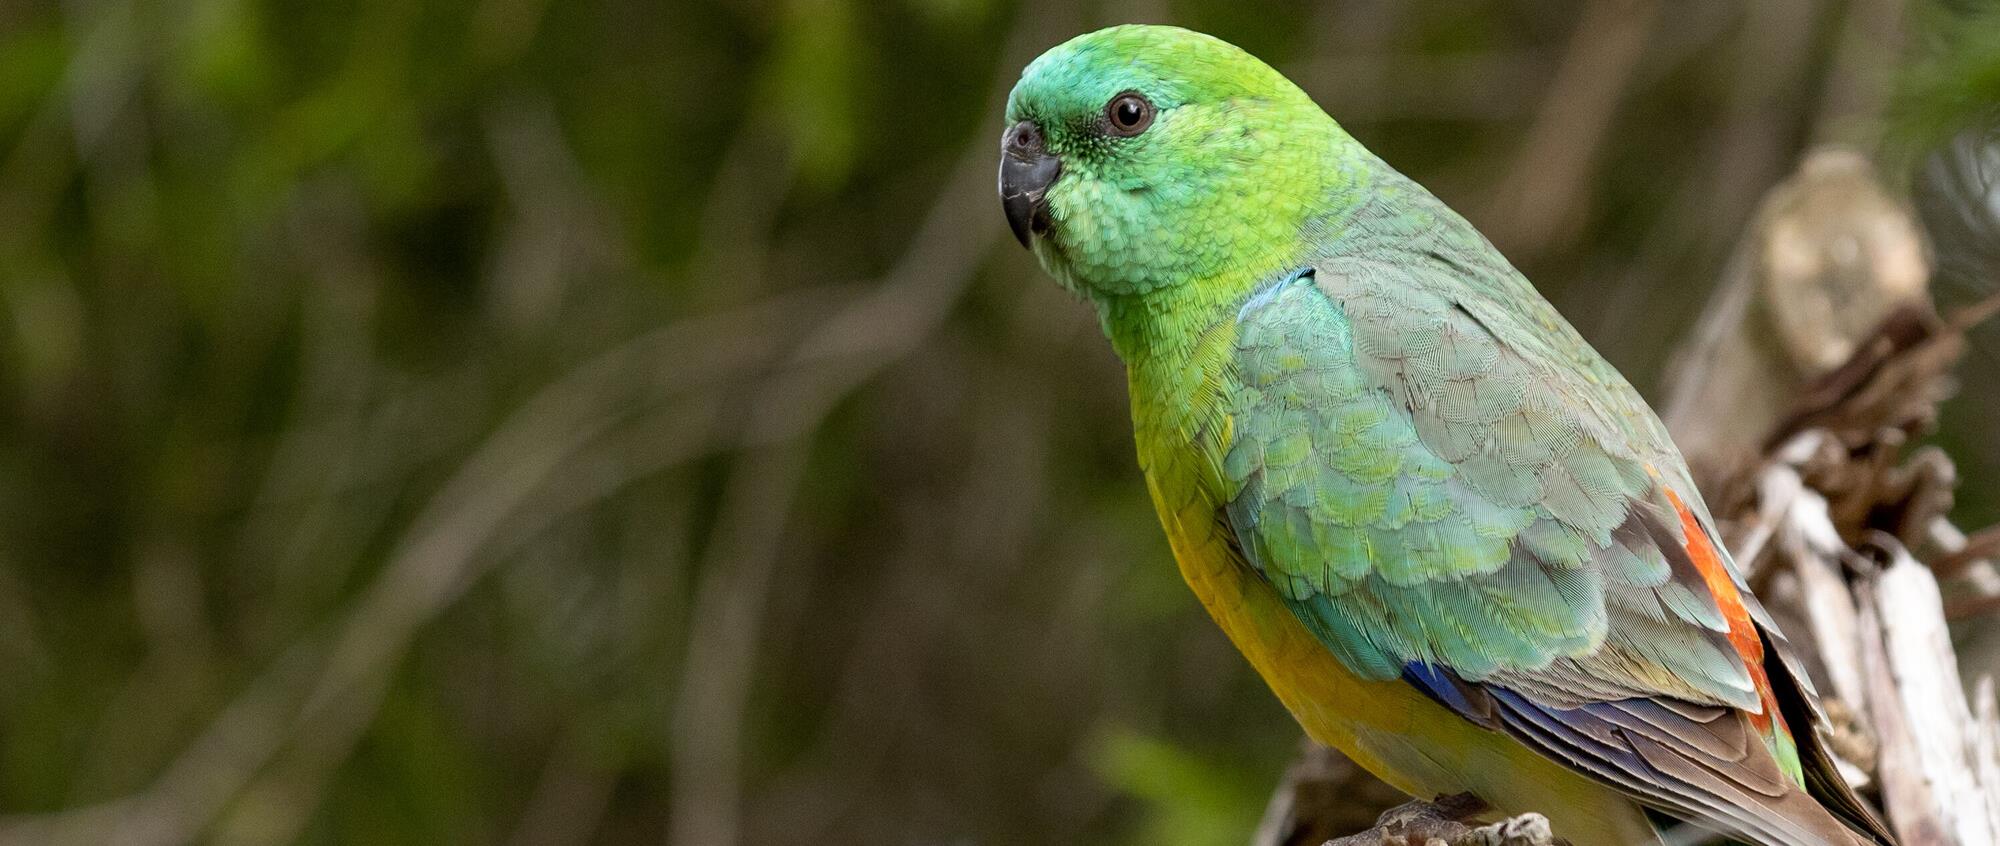 A Red-Rumped Parrot sitting on a branch and facing left of frame.